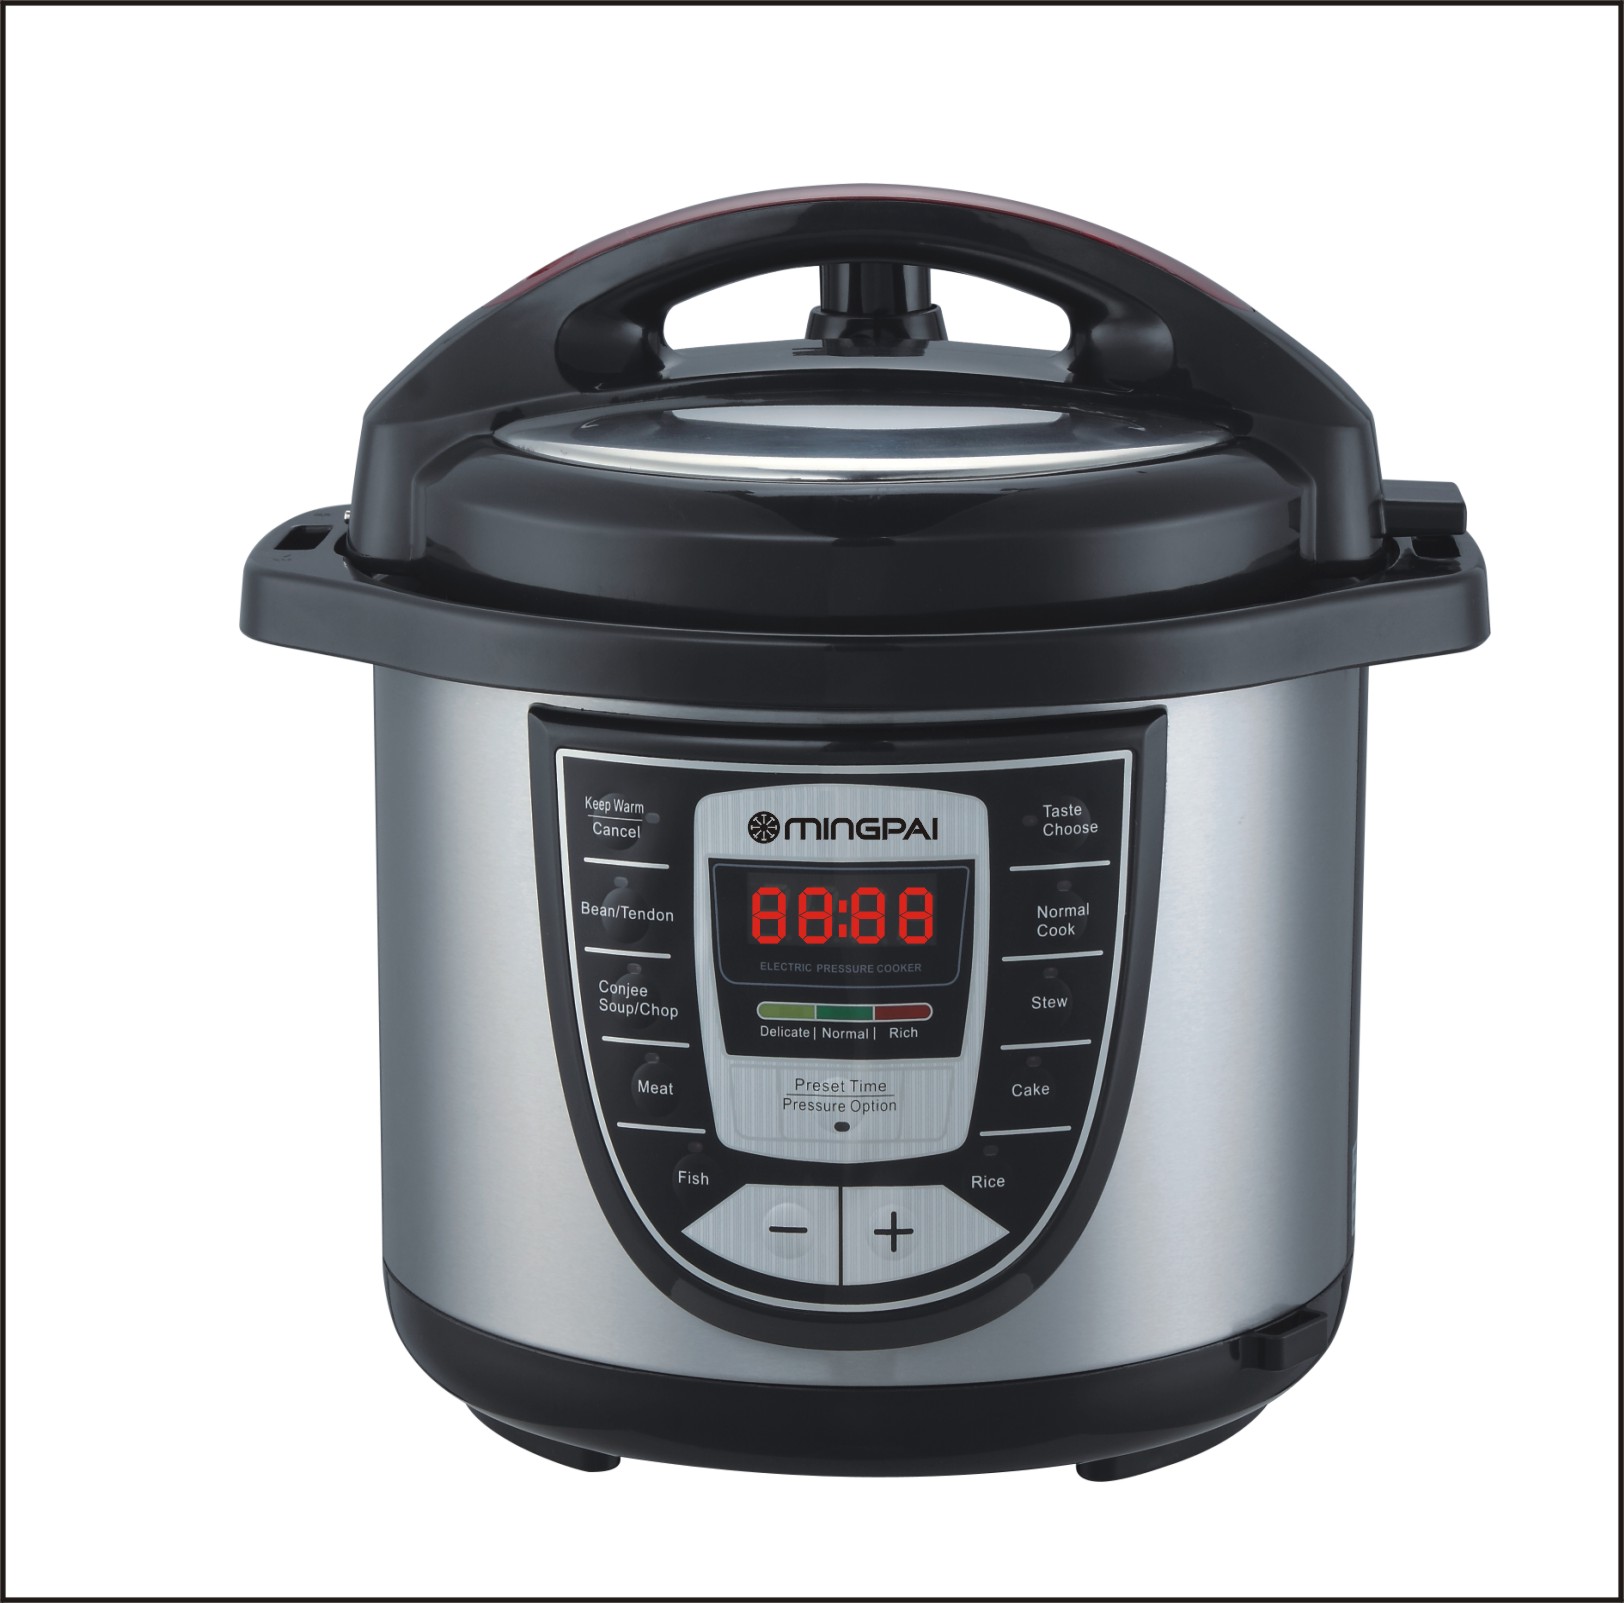 Digital display, Precise timing, Multi function,safe & convenient electrical pressure cooker